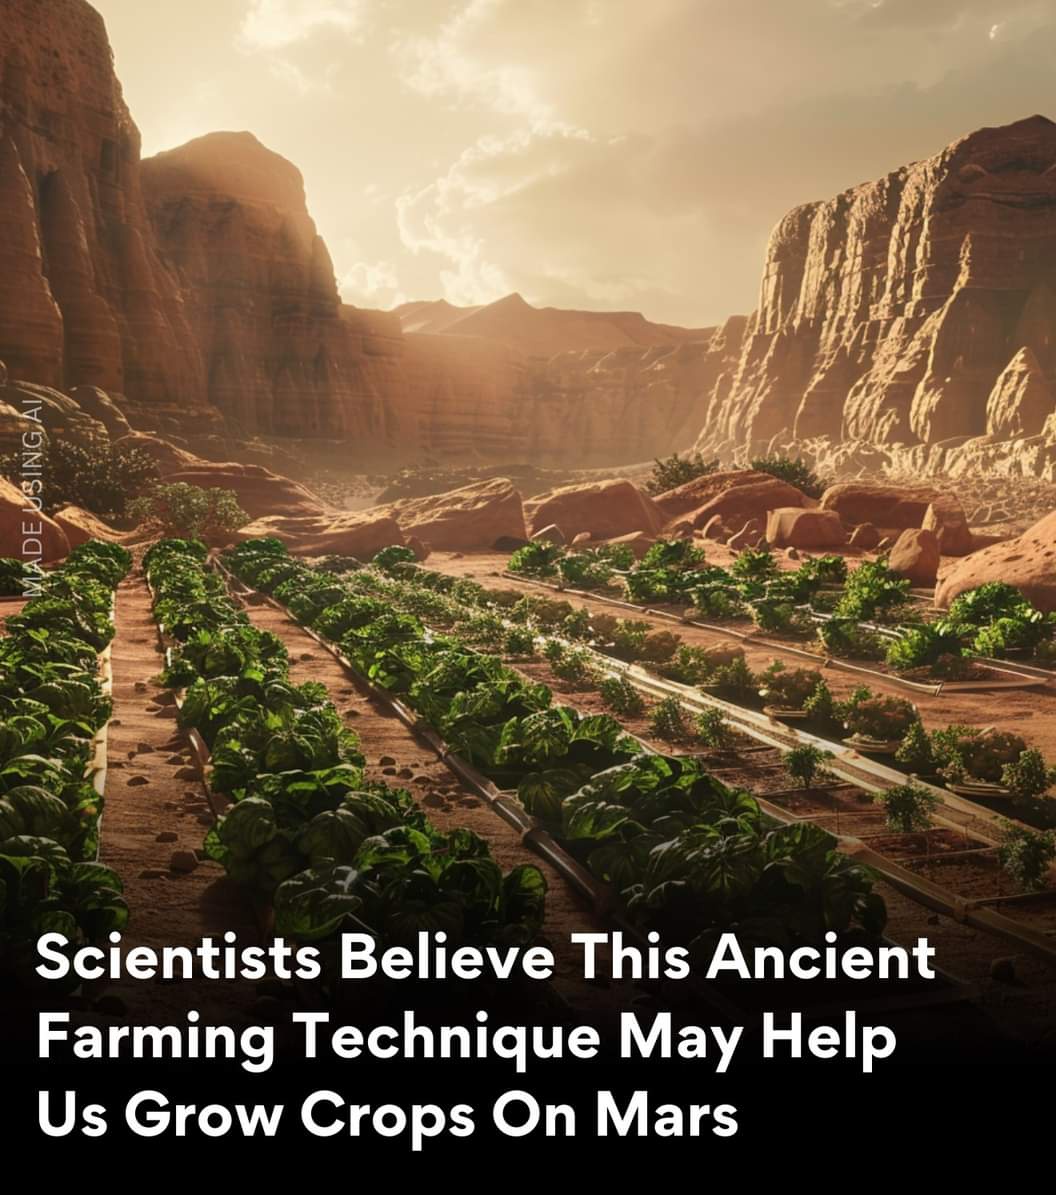 An ancient farming technique called intercropping, which involves planting several complementary crops together, might help grow food on Mars. #organicfarming #naturalfarming #ai #mars #food #valueinnovation #nobletransformationhub